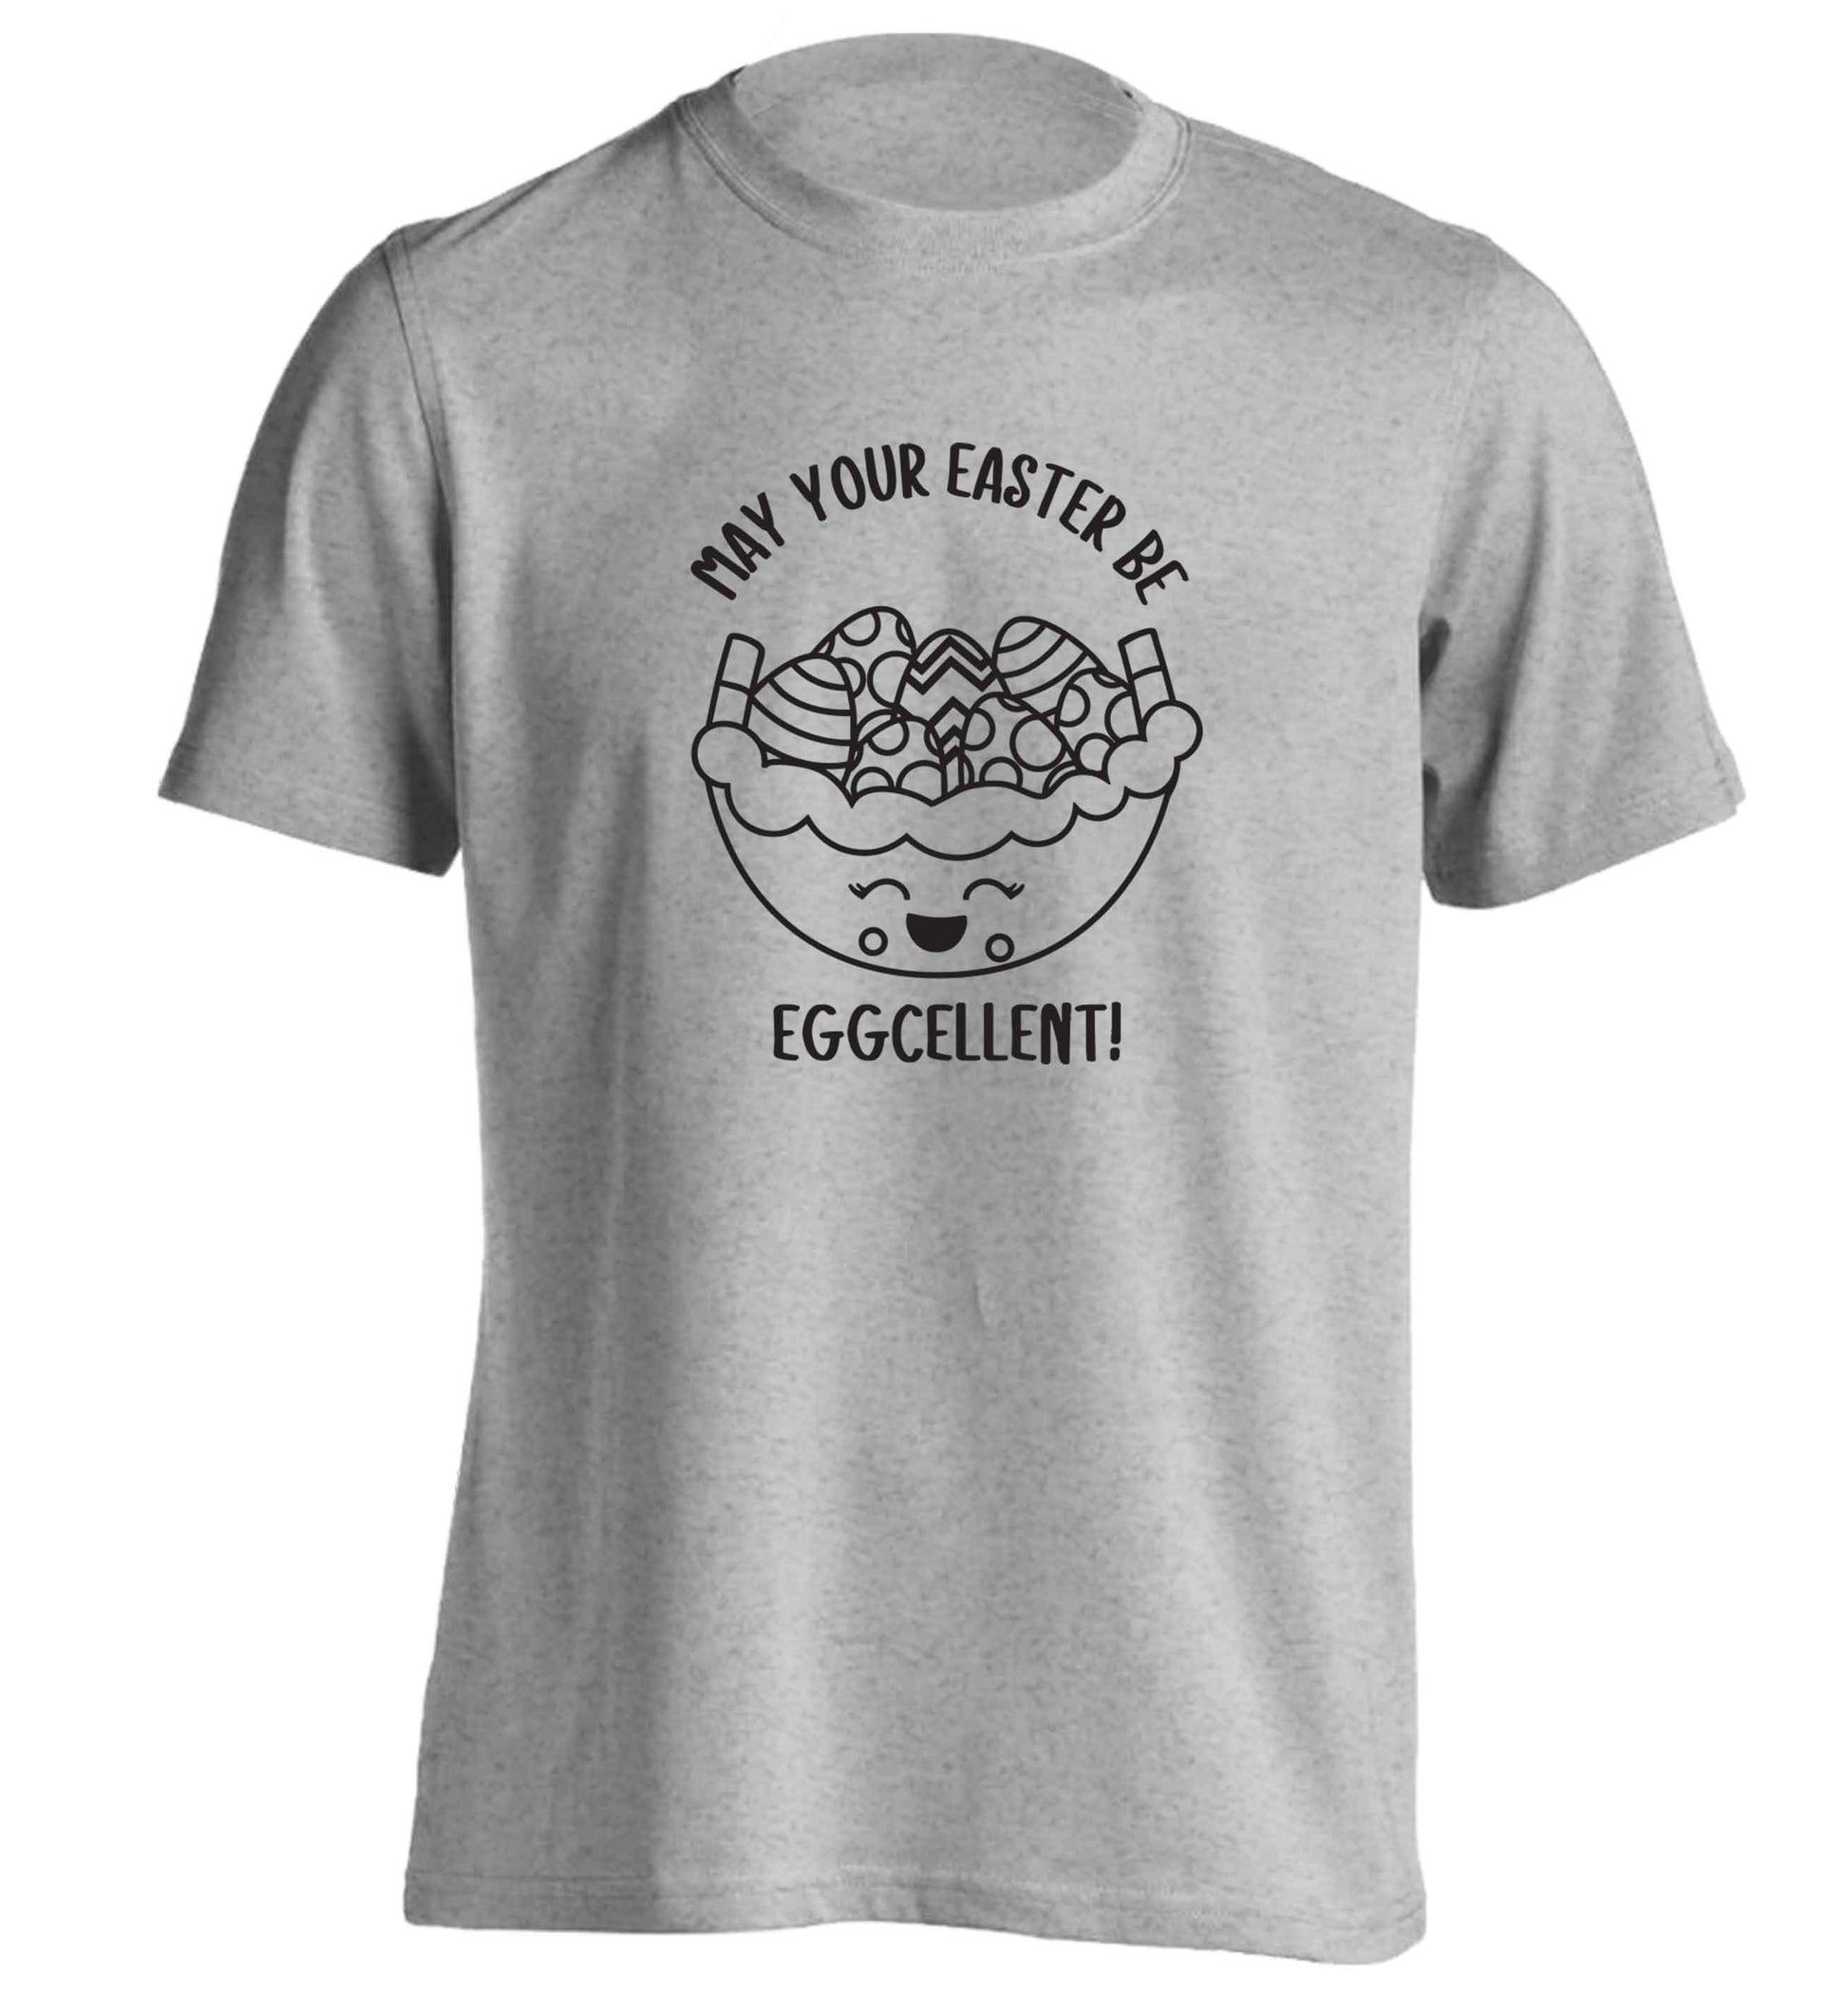 May your Easter be eggcellent adults unisex grey Tshirt 2XL